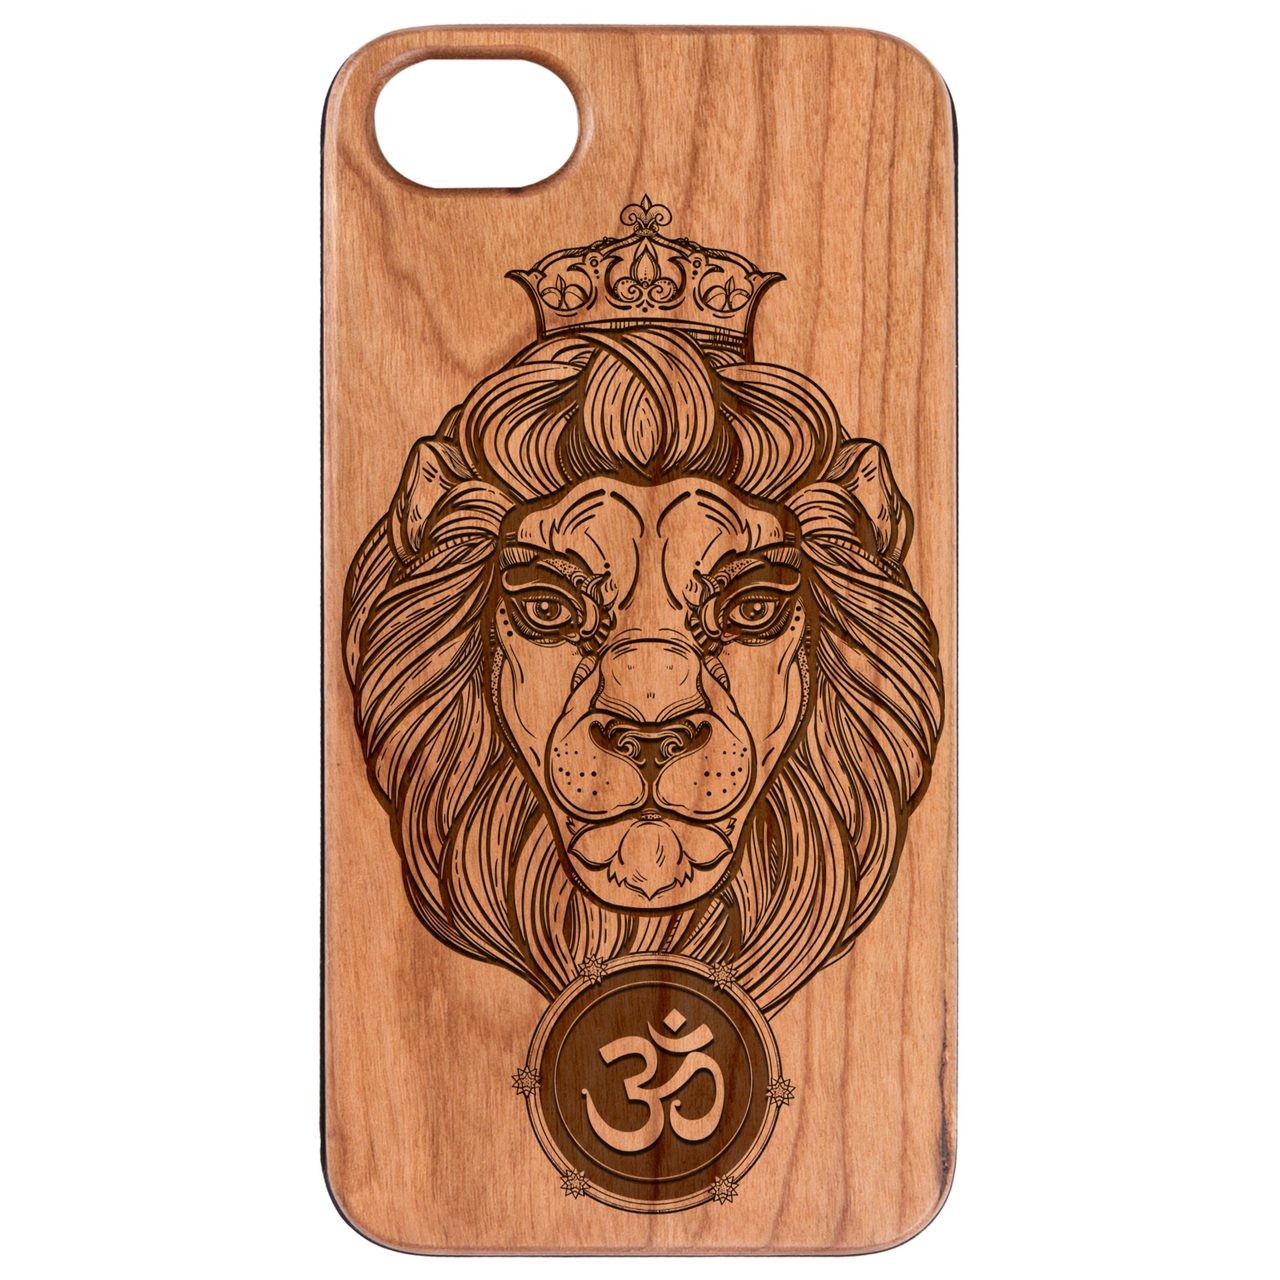  Heraldic Lion - Engraved - Wooden Phone Case - IPhone 13 Models